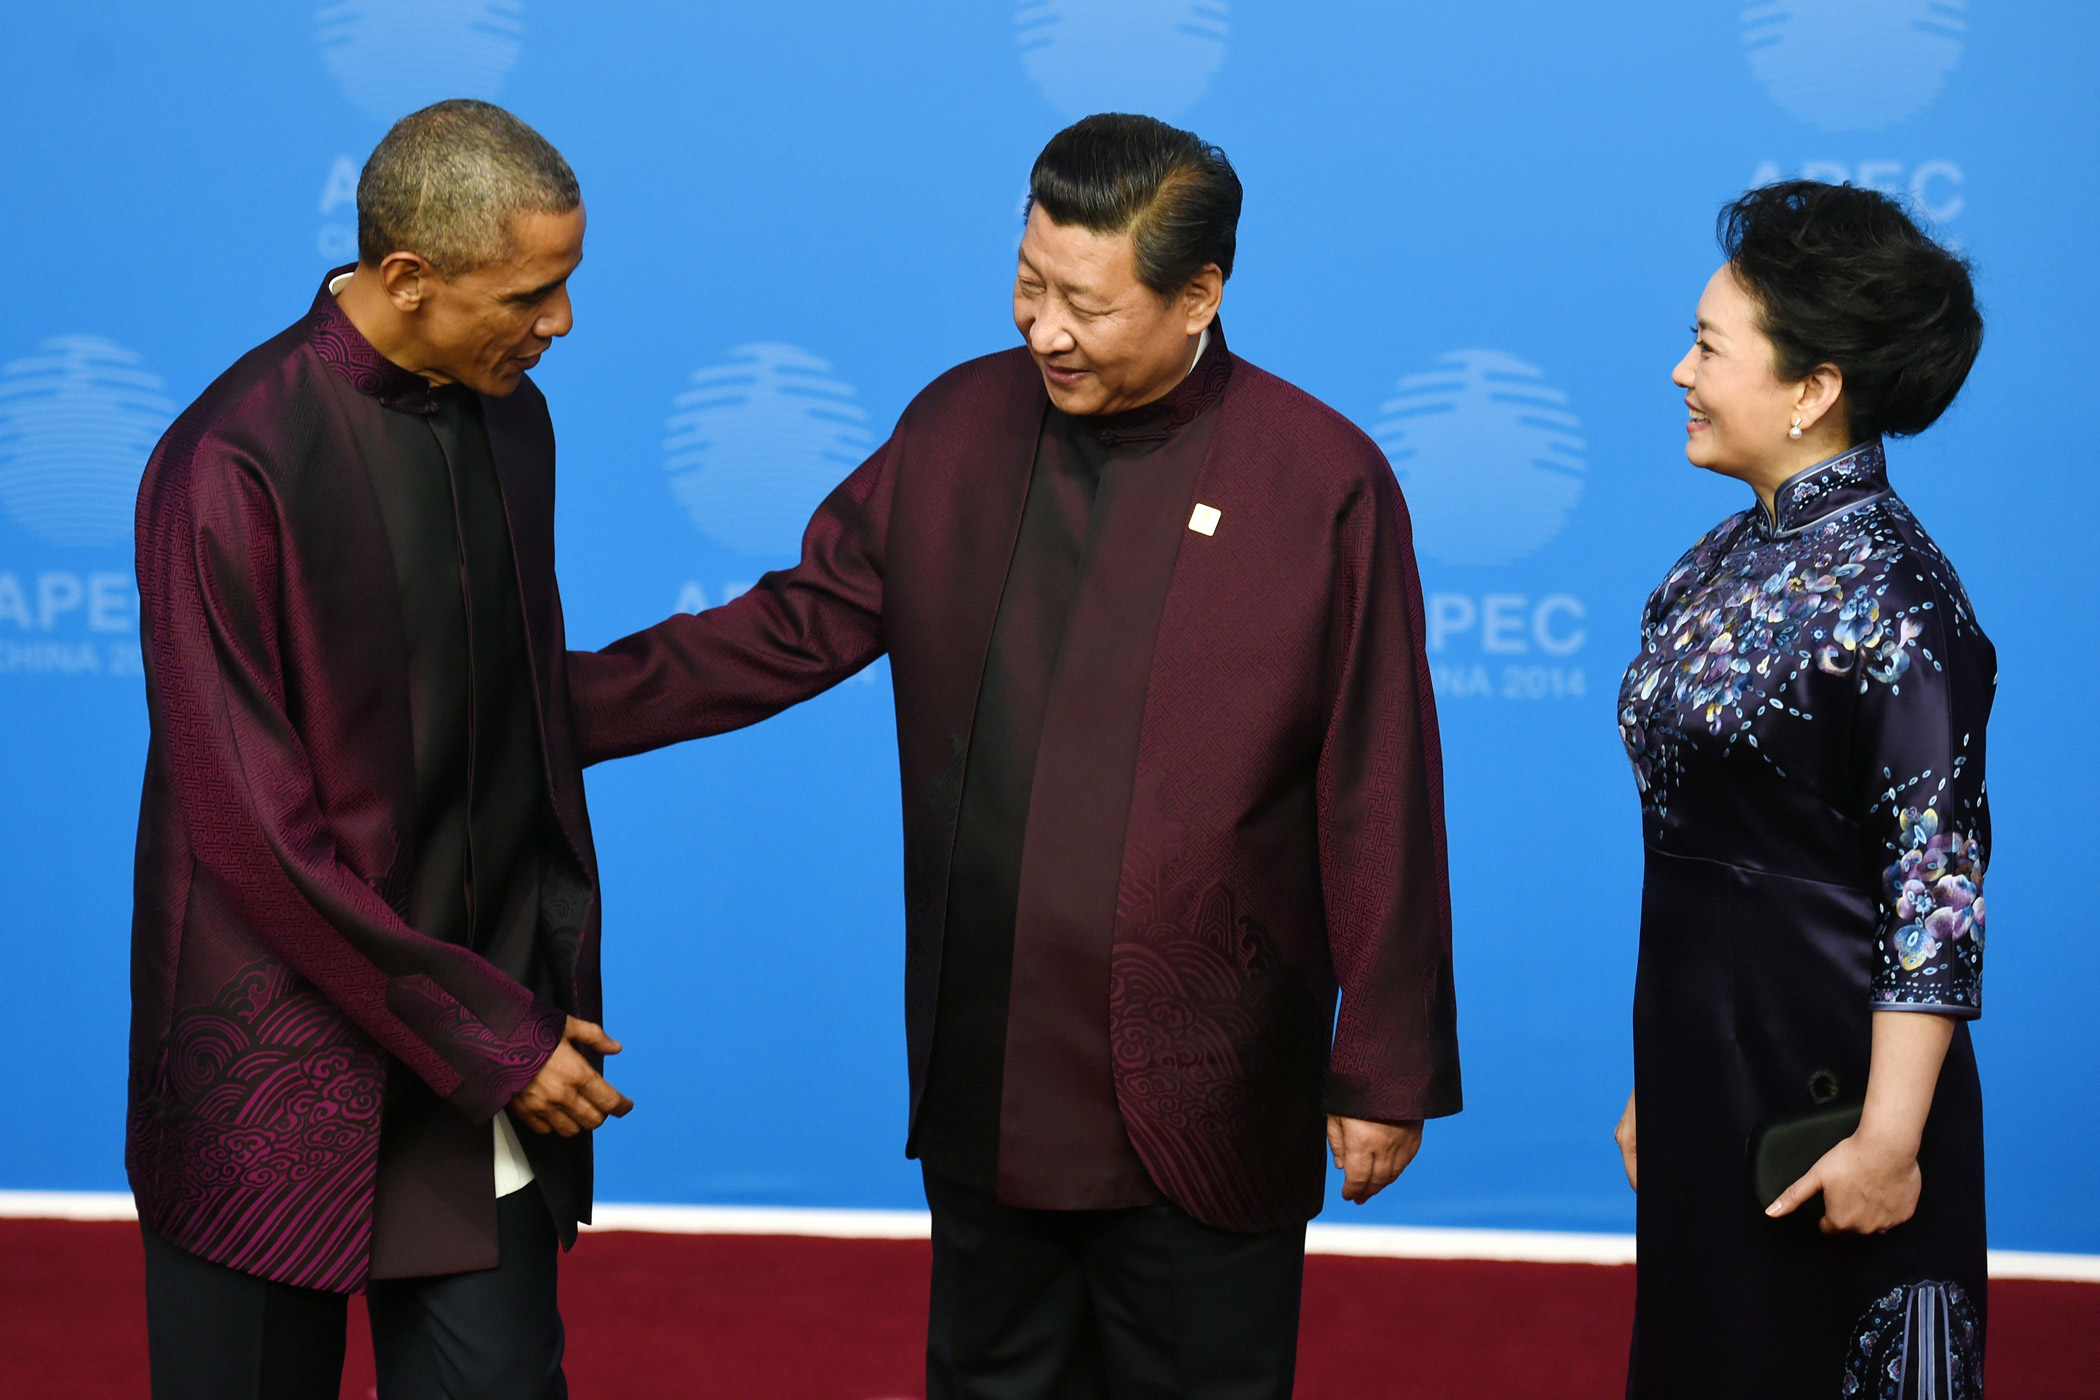 U.S. President Barack Obama is greeted by Chinese President Xi Jinping and his wife Peng Liyuan as he arrives for the APEC Summit banquet in the Chinese capital Beijing on Nov. 10, 2014.